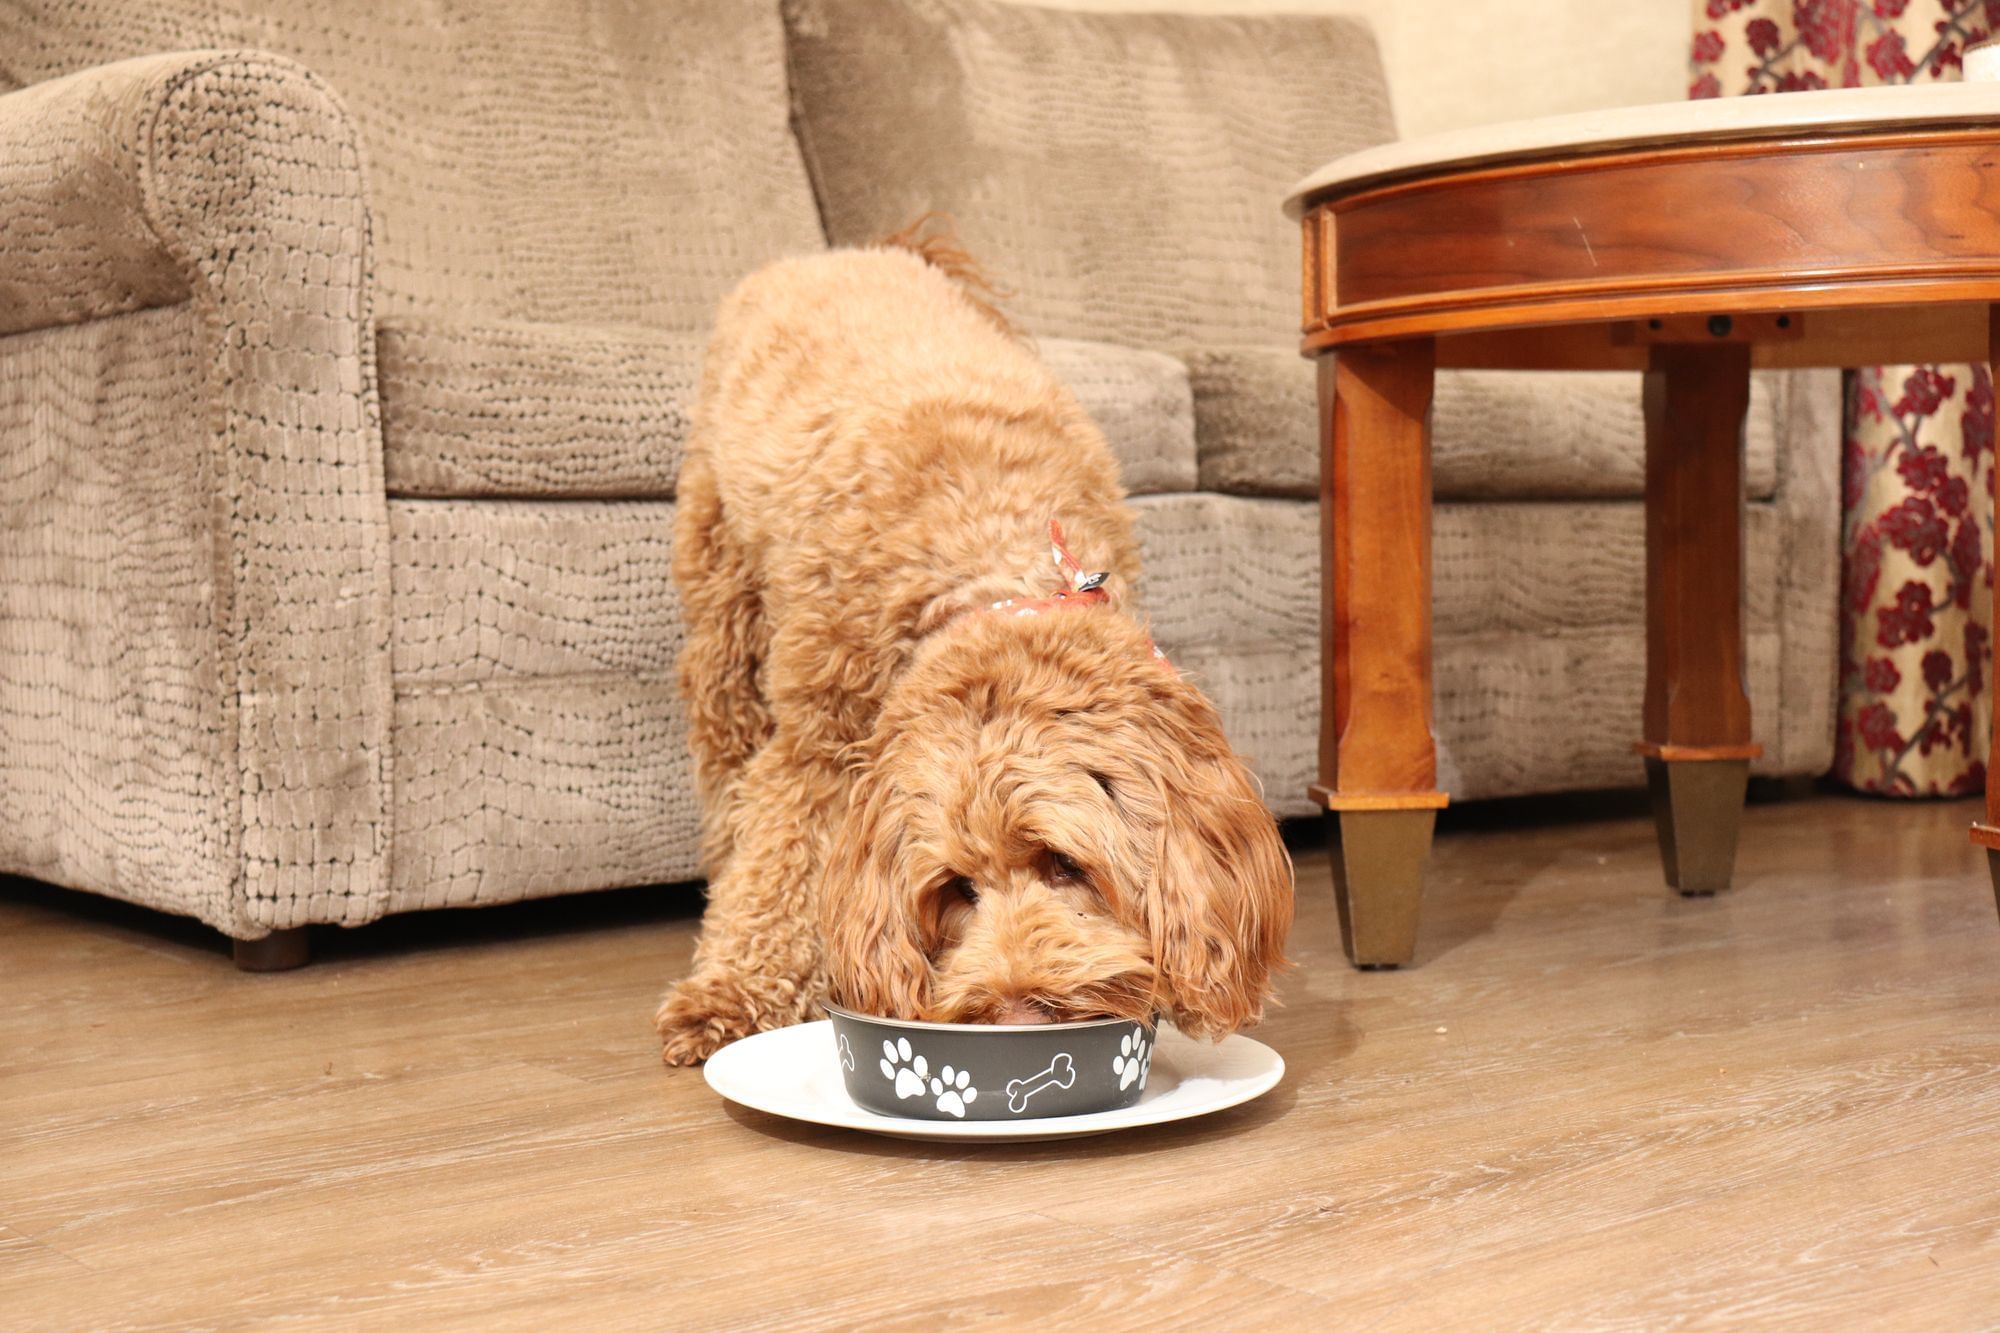 Labradoodle eating out of doggie bowl